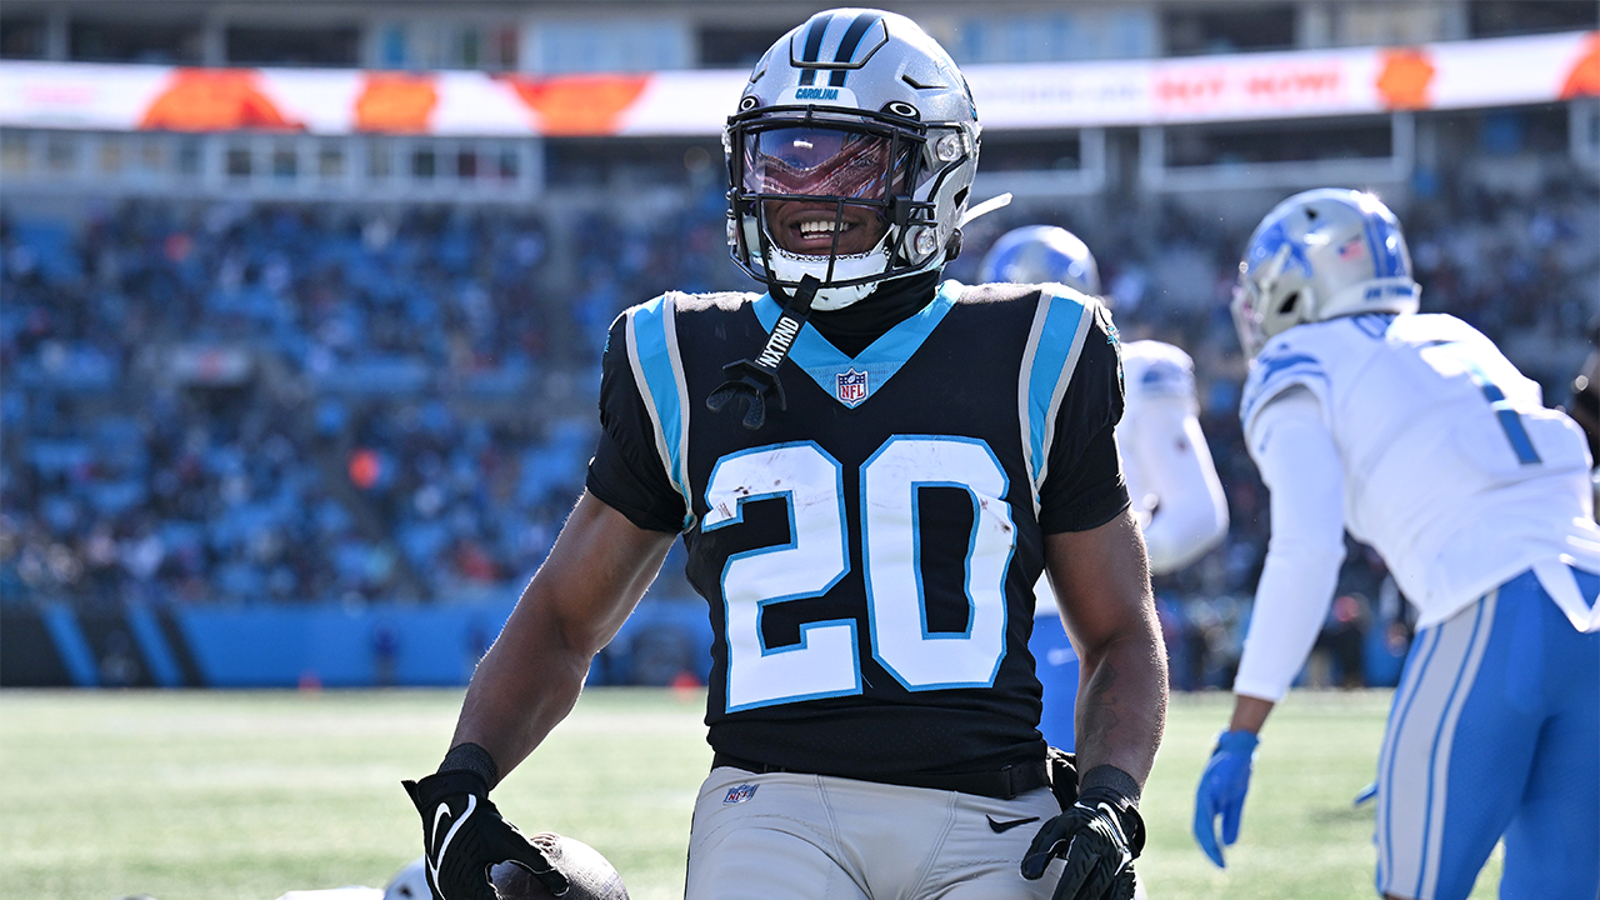 Panthers accumulate 320 rushing yards in win over Lions